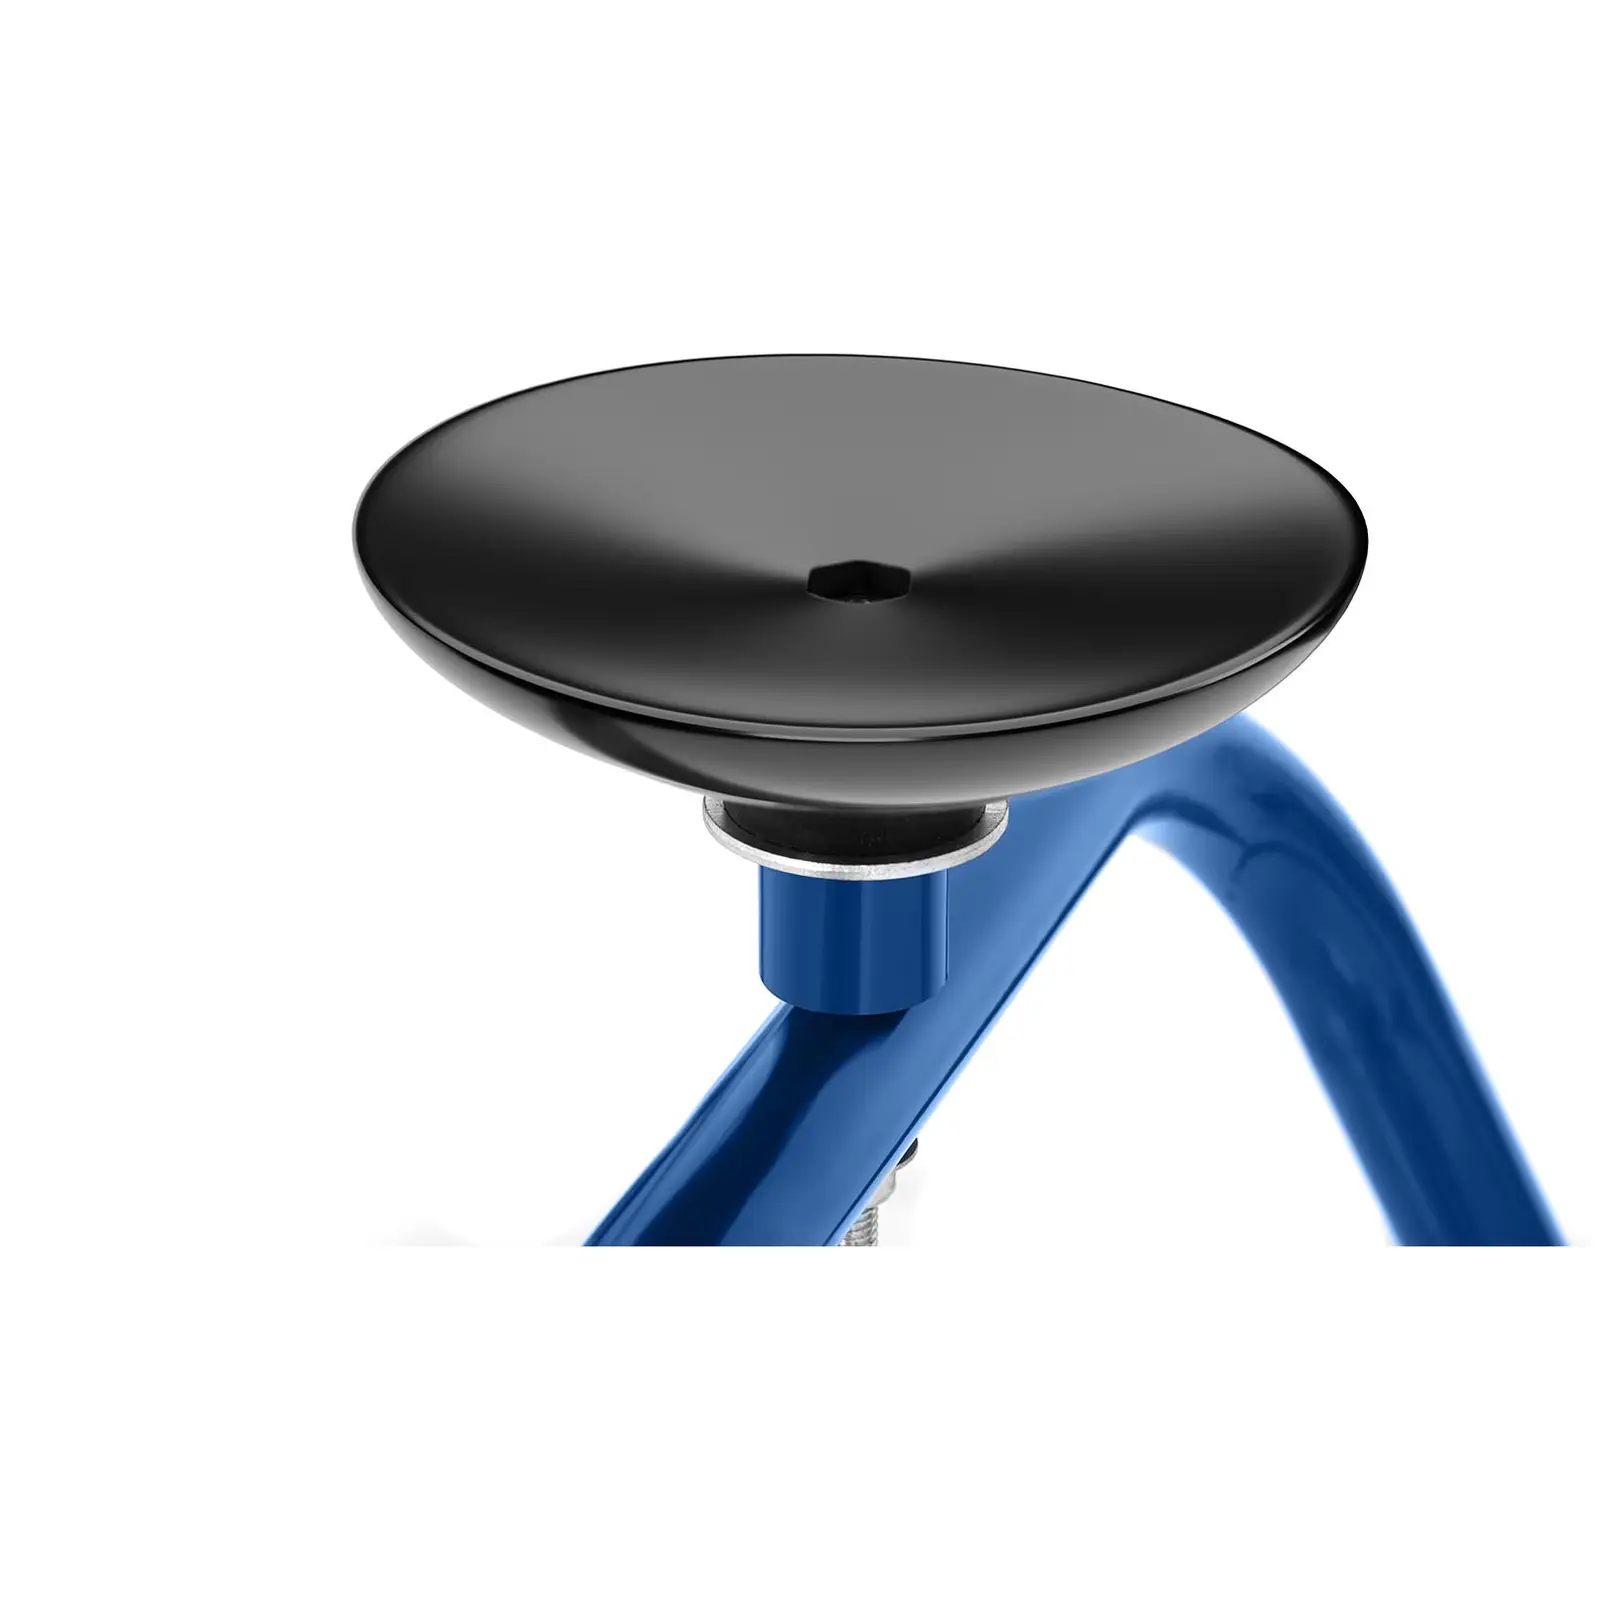 Windscreen Stand with Suction Cups - 150 kg